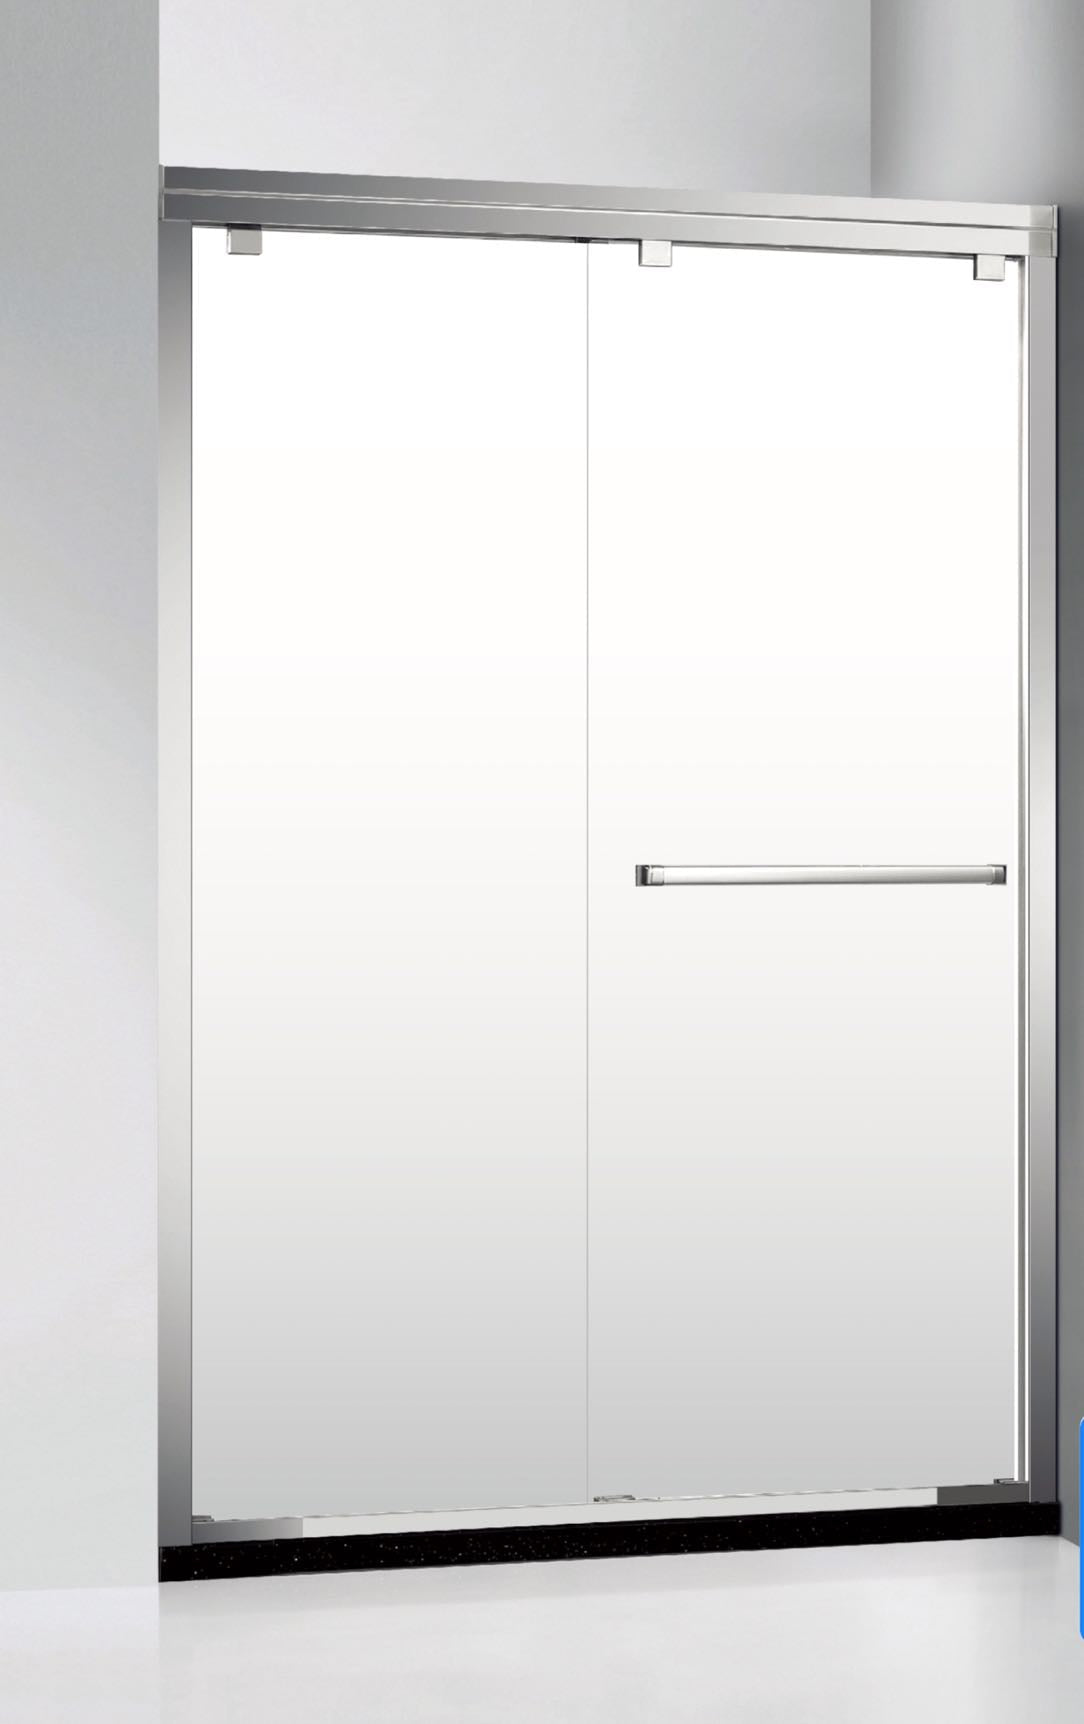 54" Frosted  ASD Series Bypass Shower Door (5/16" Thickness) Low Ceiling 72" (Silver /Chrome) Privacy